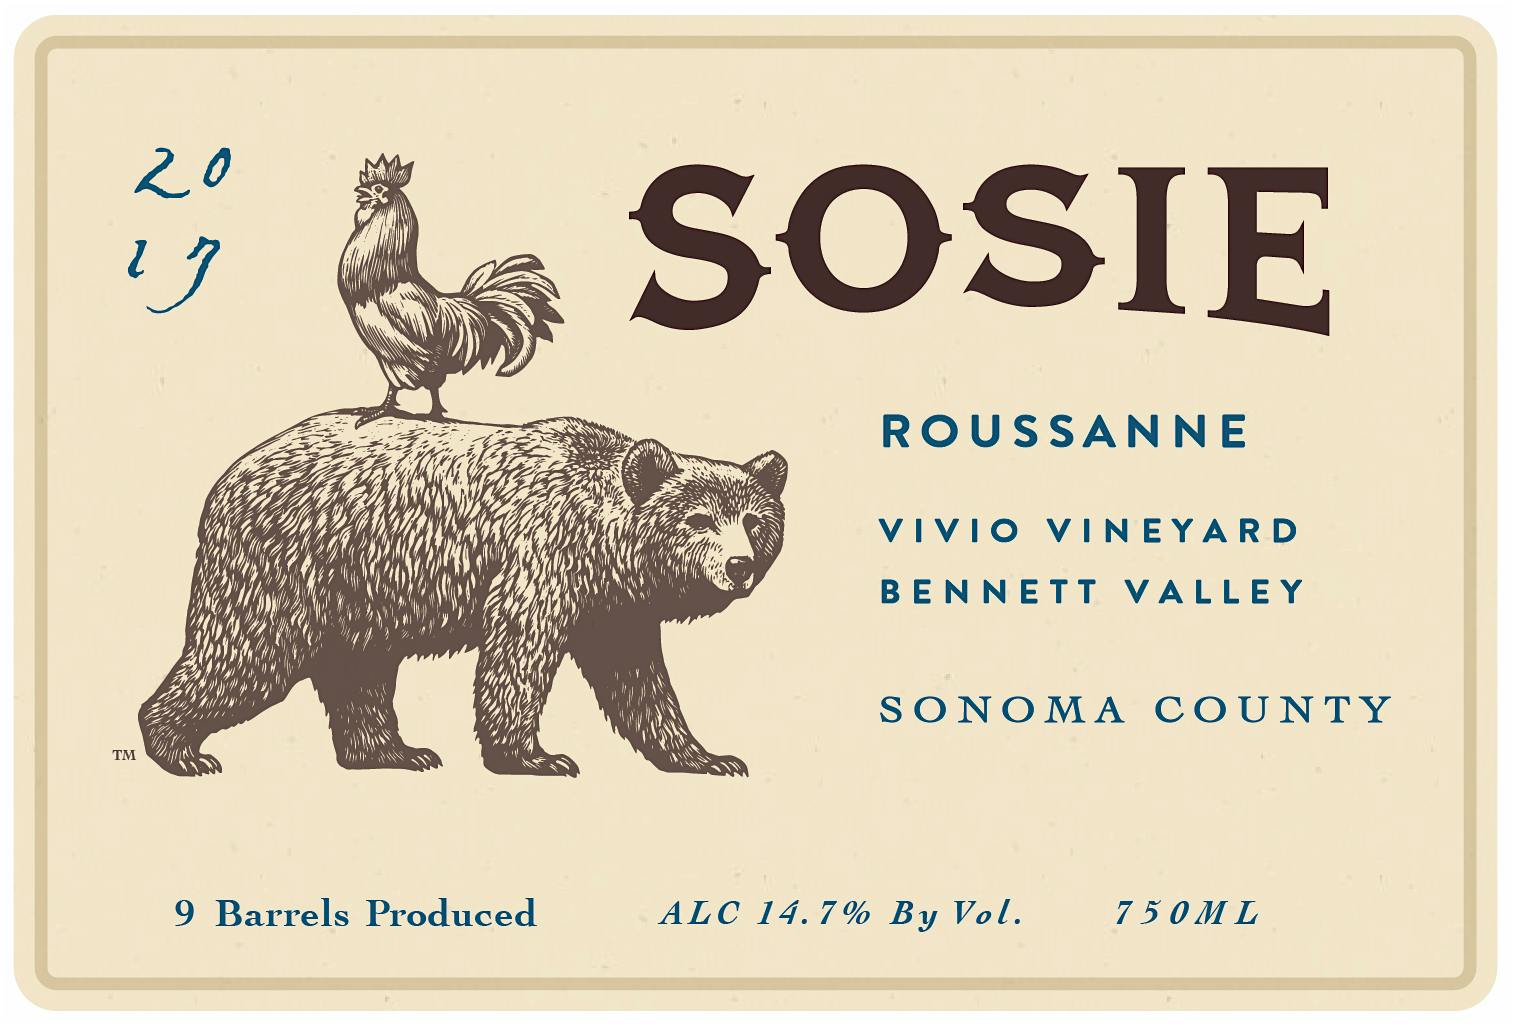 Label for Sosie